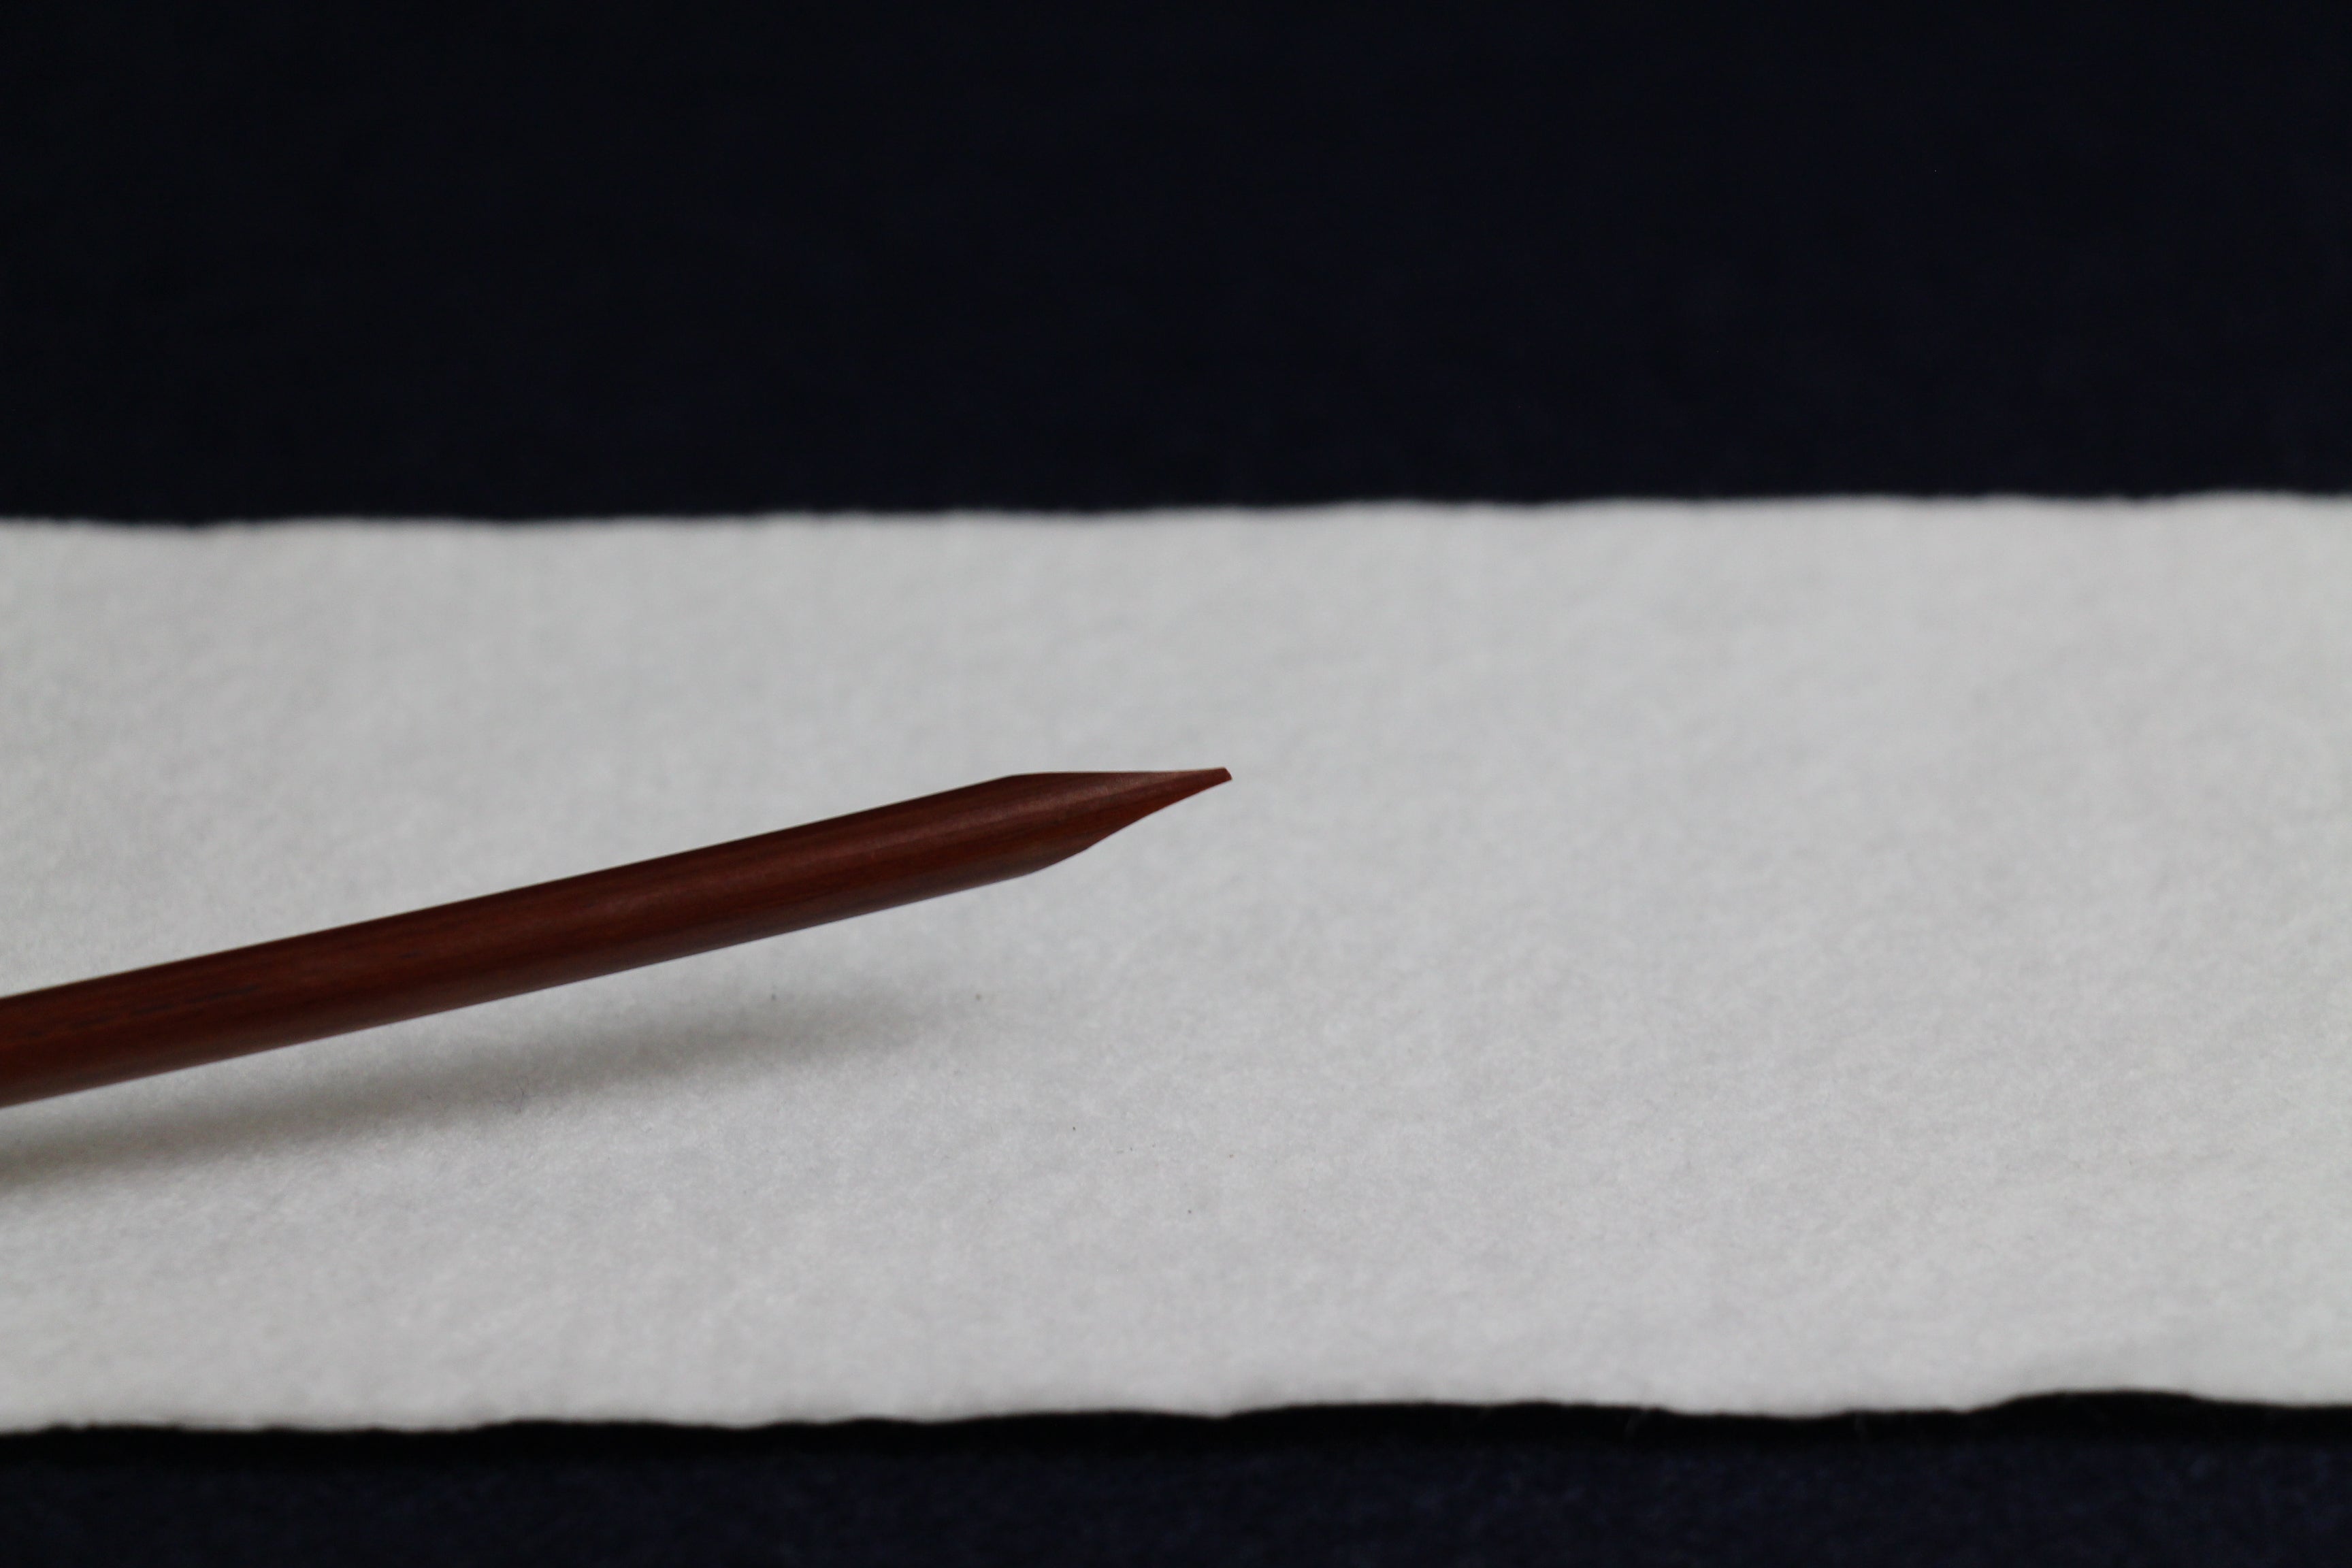 Traditional reed qalam pen for Arabic calligraphy - open and cut for Naskh script 2